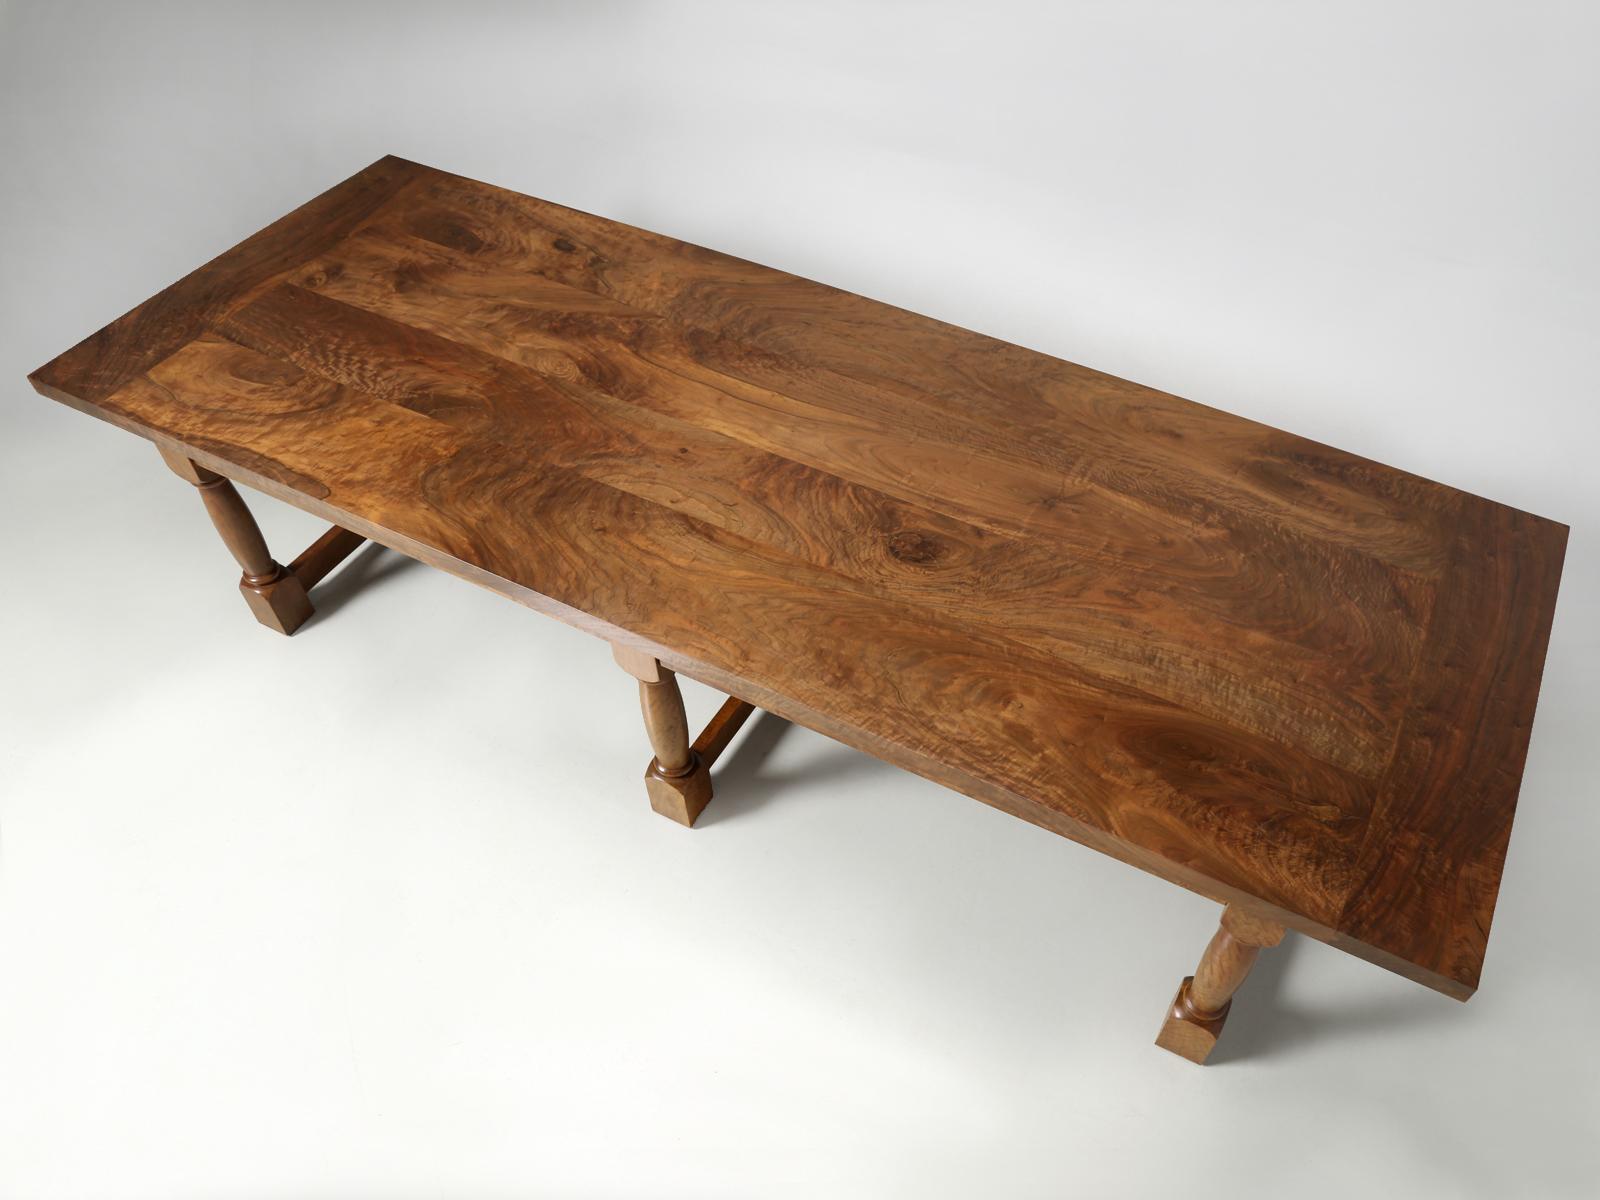 Hand-Crafted American Made Figured Walnut Desk Available Numerous Dimensions & Configurations For Sale